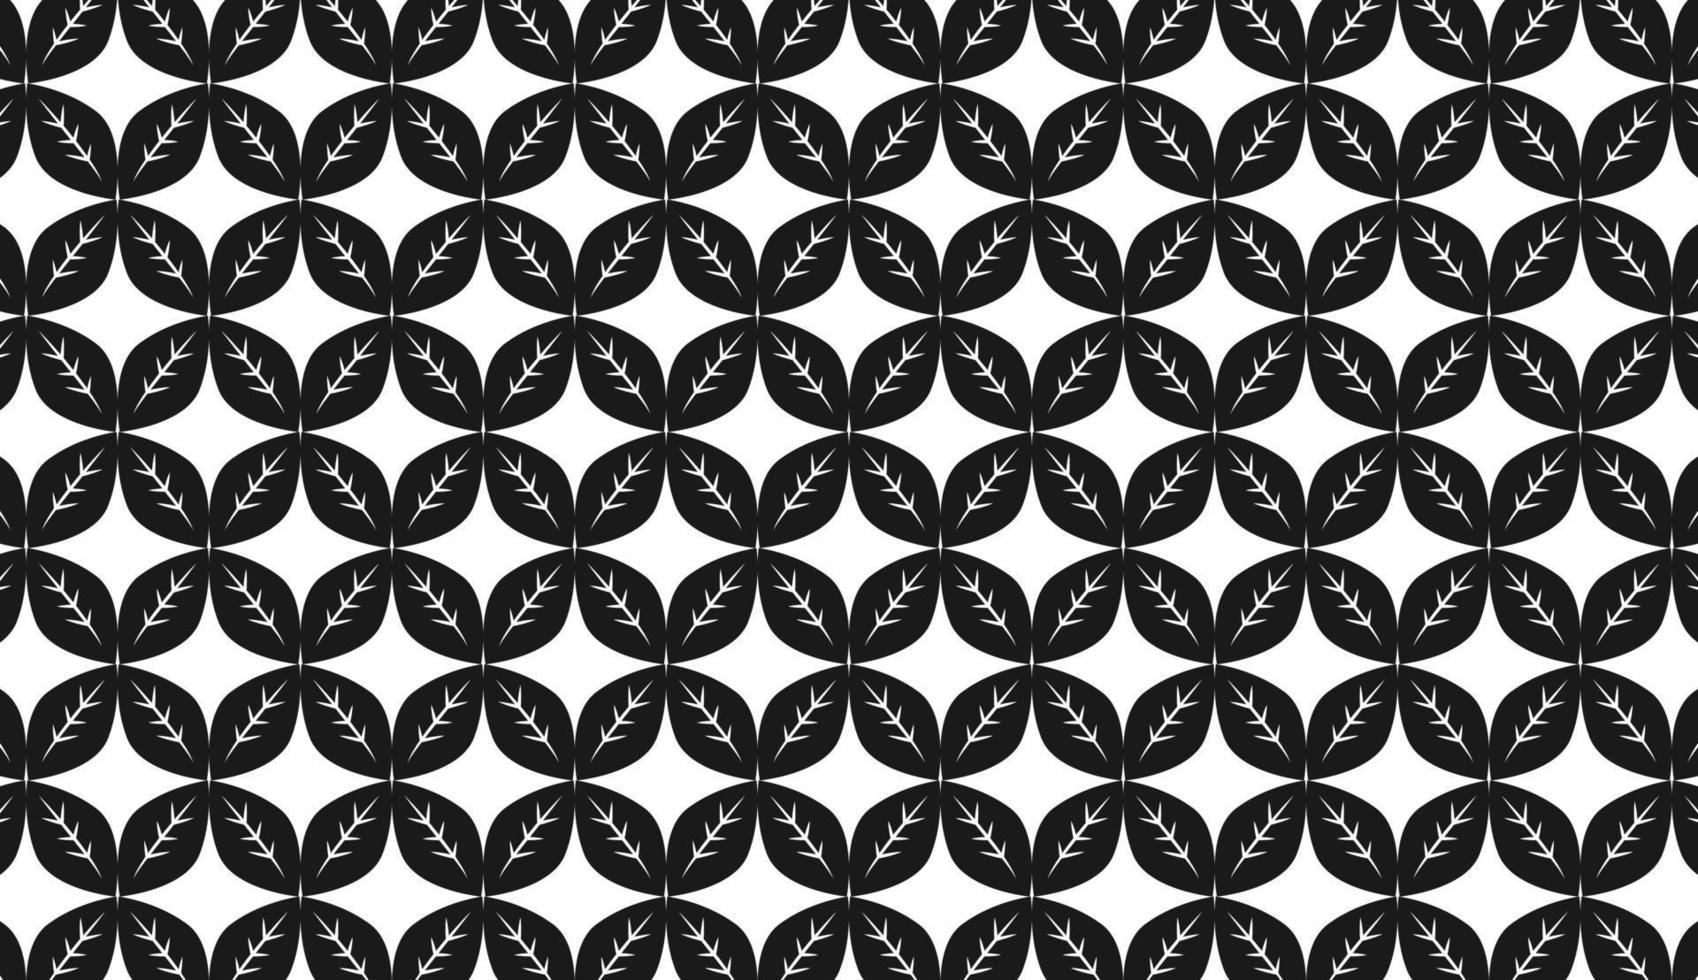 Seamless pattern. Black and white leaf motif. Simple repeating pattern design. Can be used for posters, brochures, postcards, and other printing needs. Vector illustration